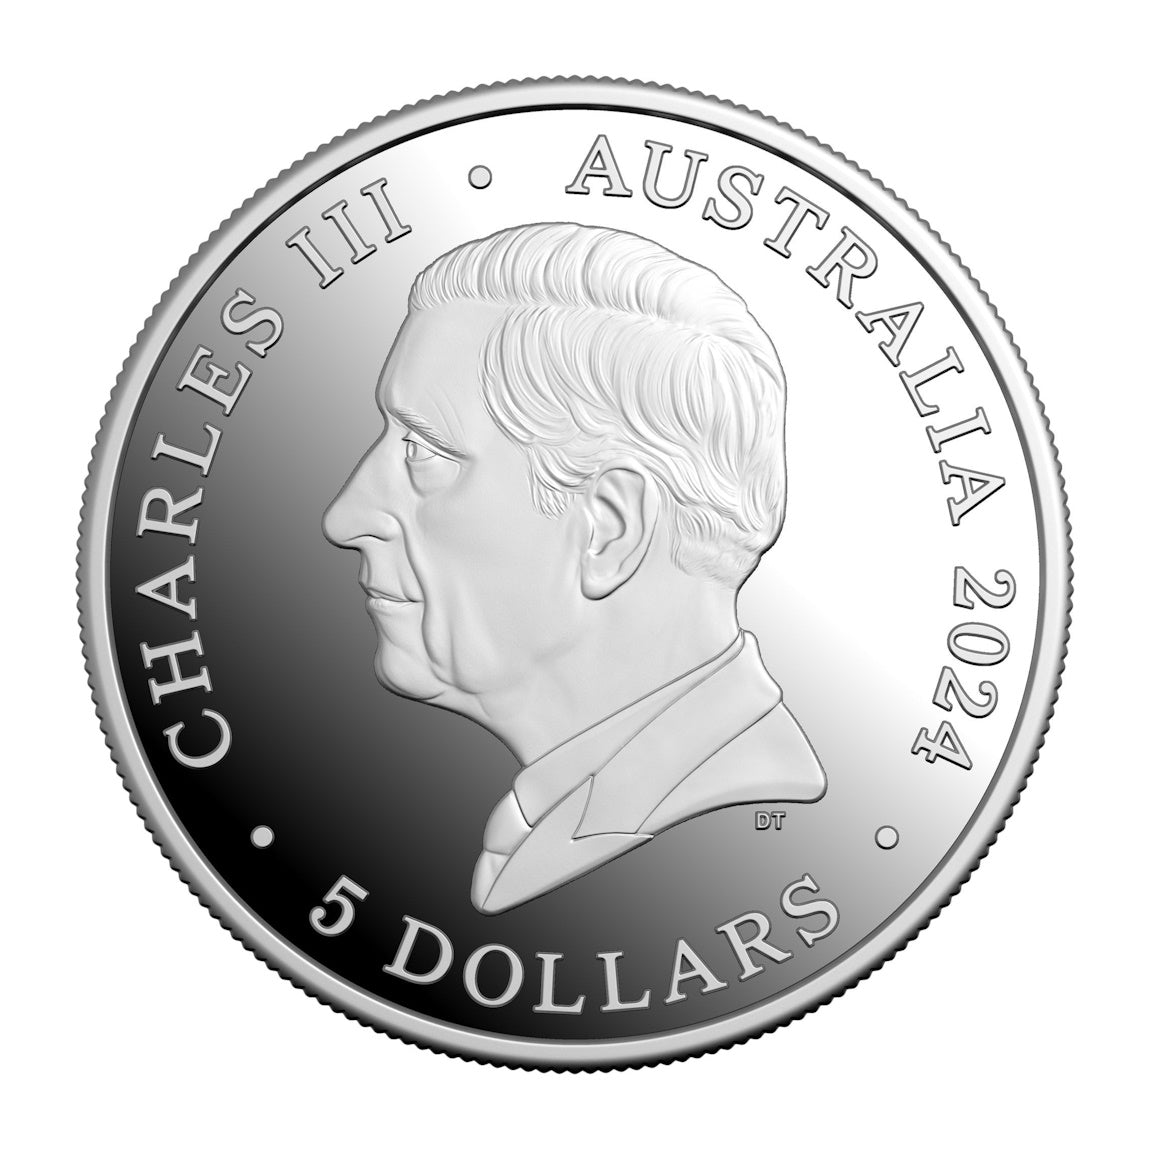 2024 Australian Paralympic Team $5 Selectively Gold-Plated Proof Coin